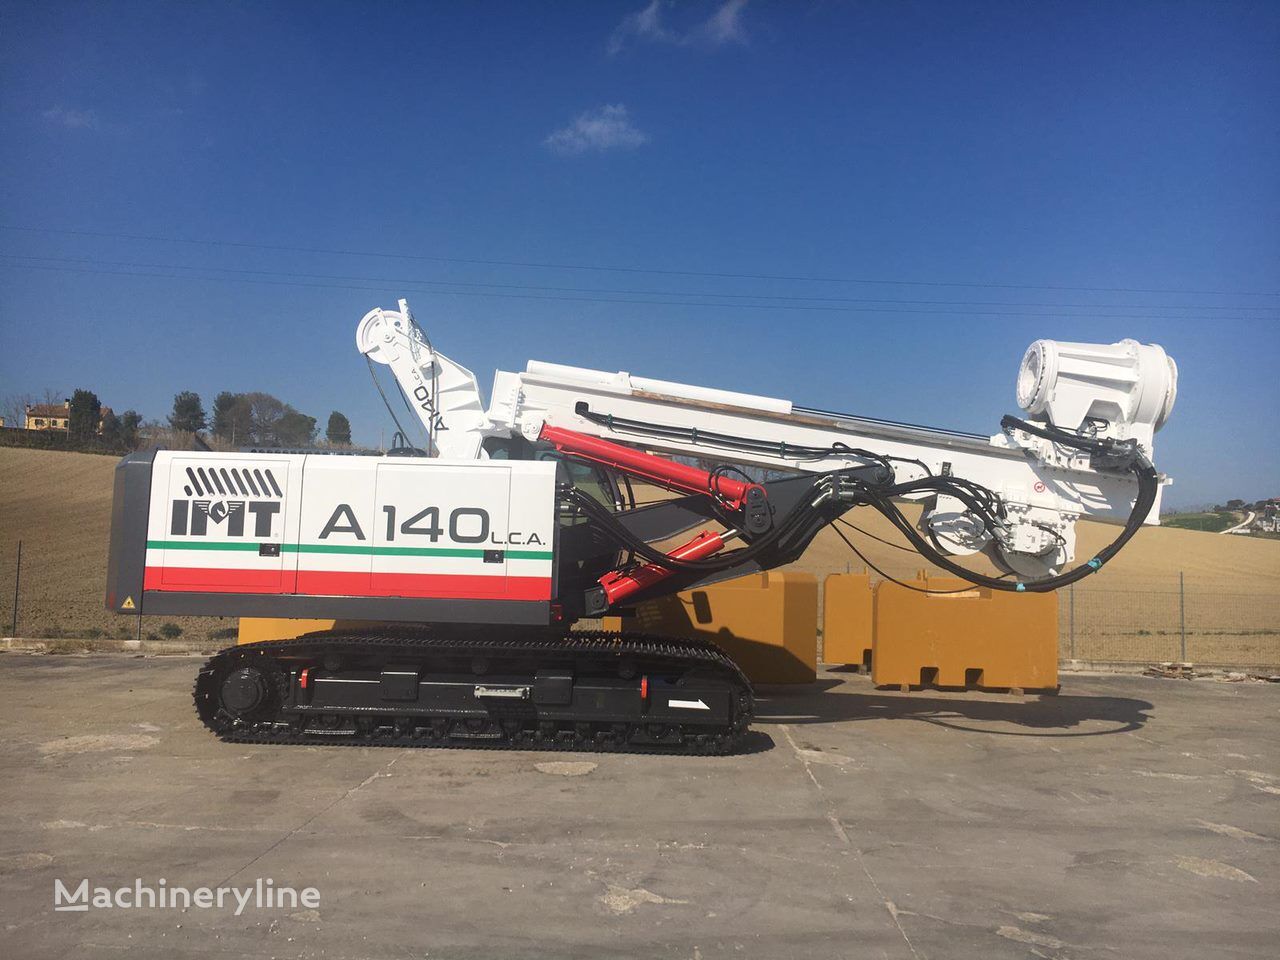 IMT A140 LCA drilling rig